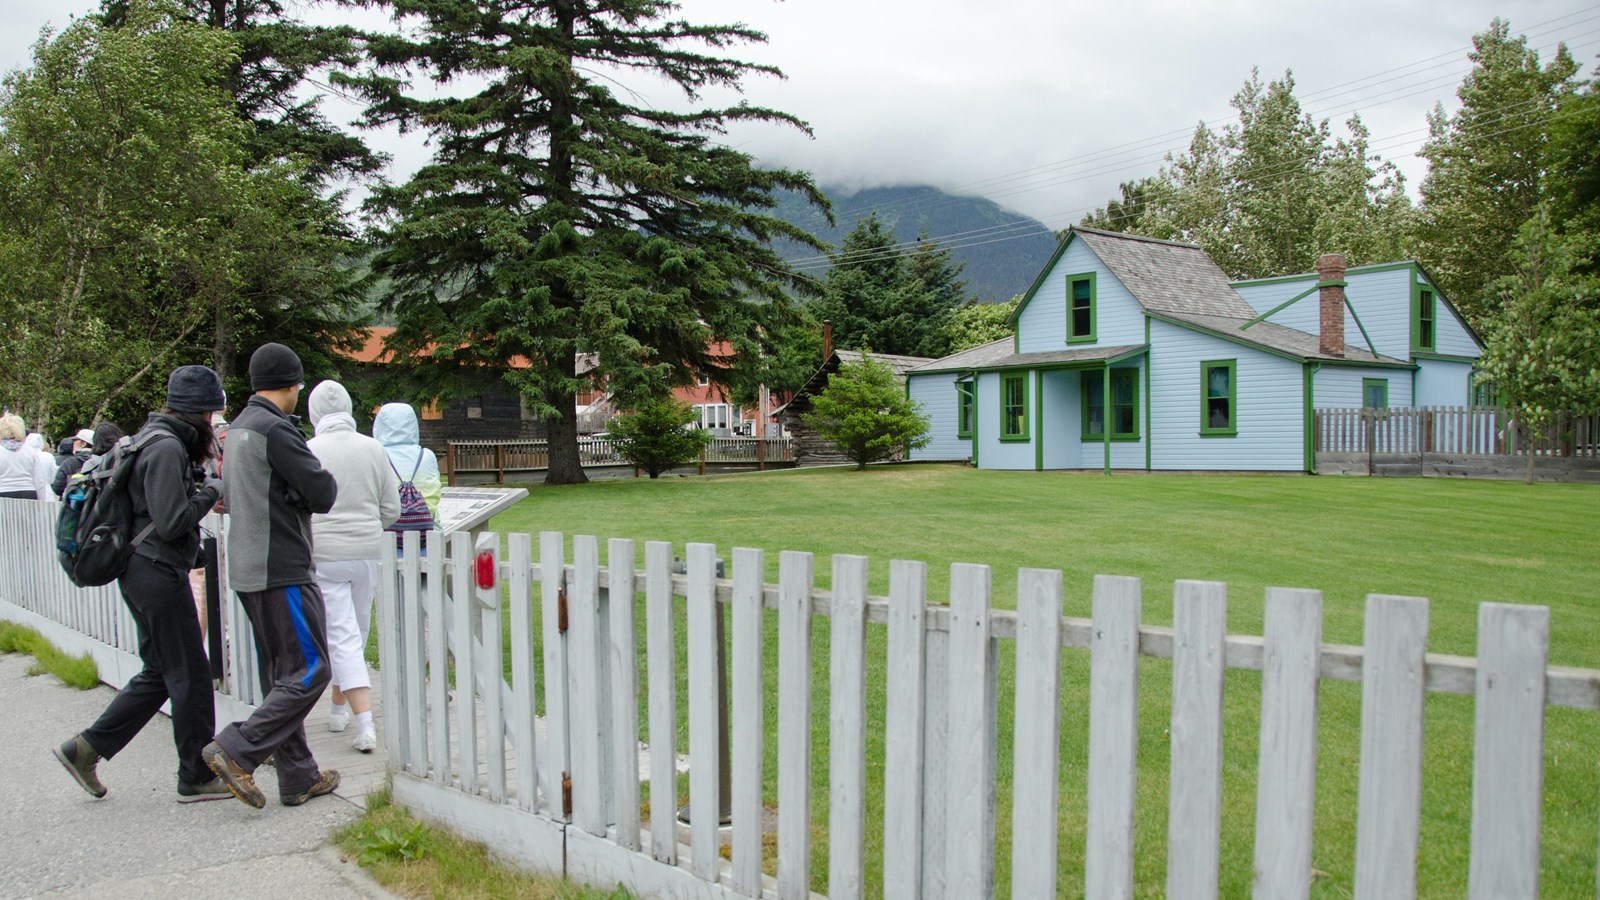 people walk through a fence to a grassy lawn and blue house